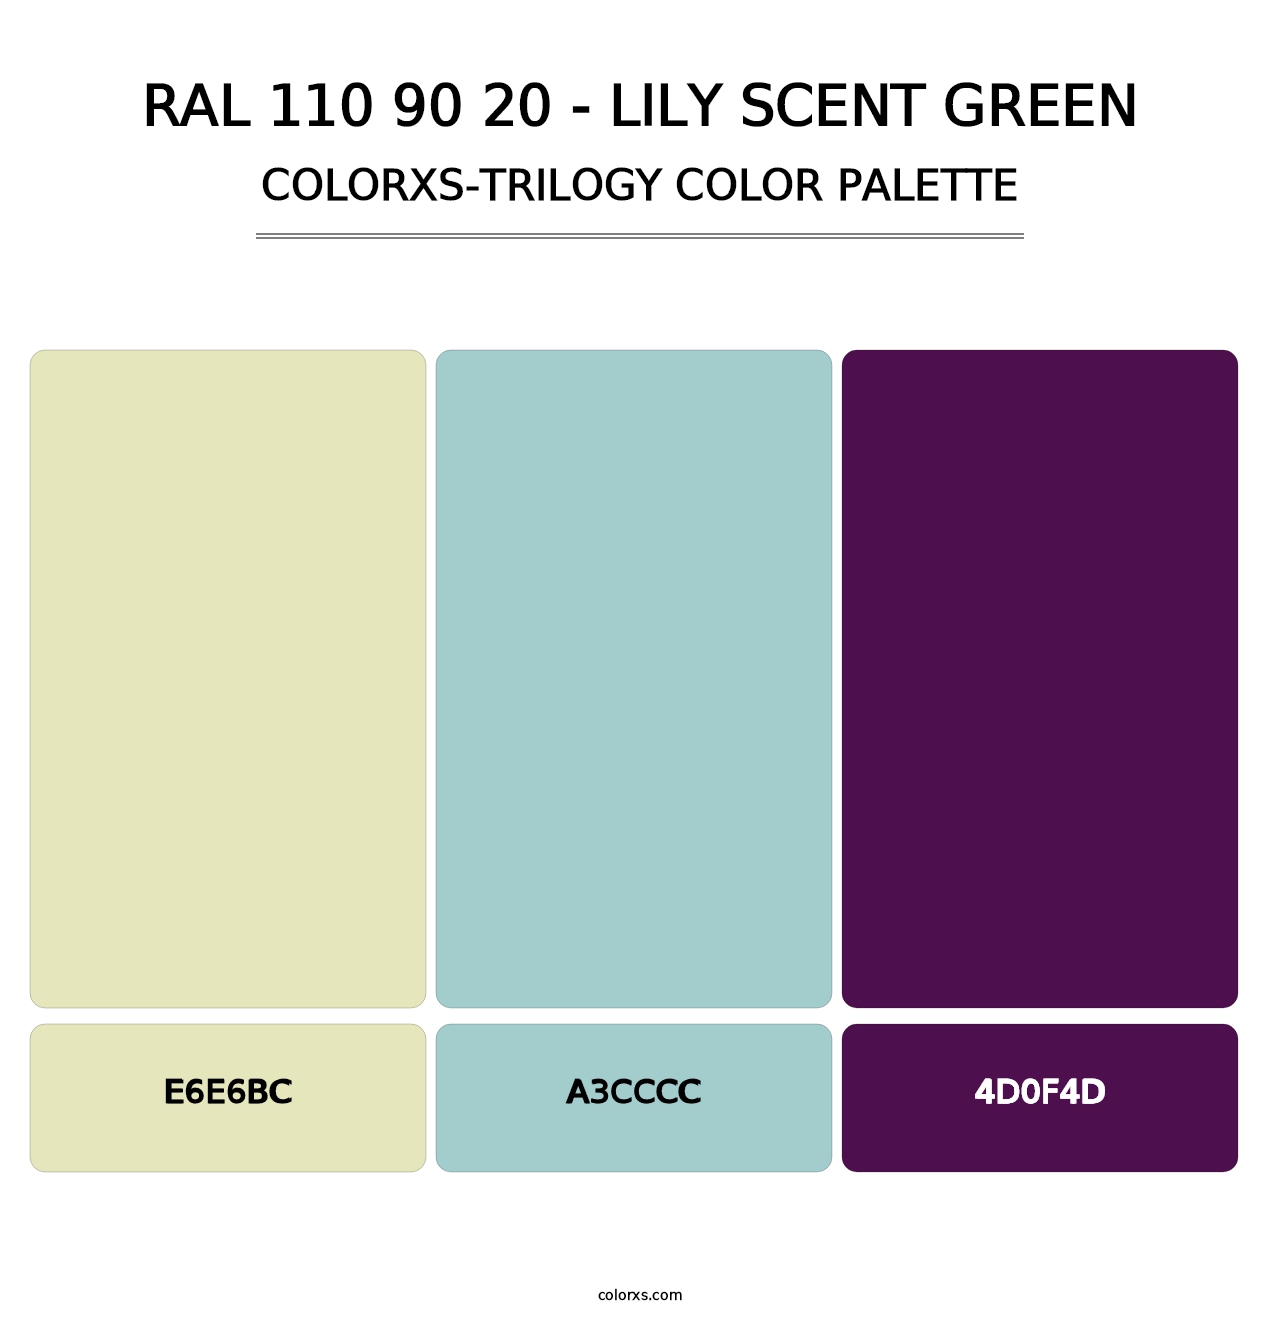 RAL 110 90 20 - Lily Scent Green - Colorxs Trilogy Palette